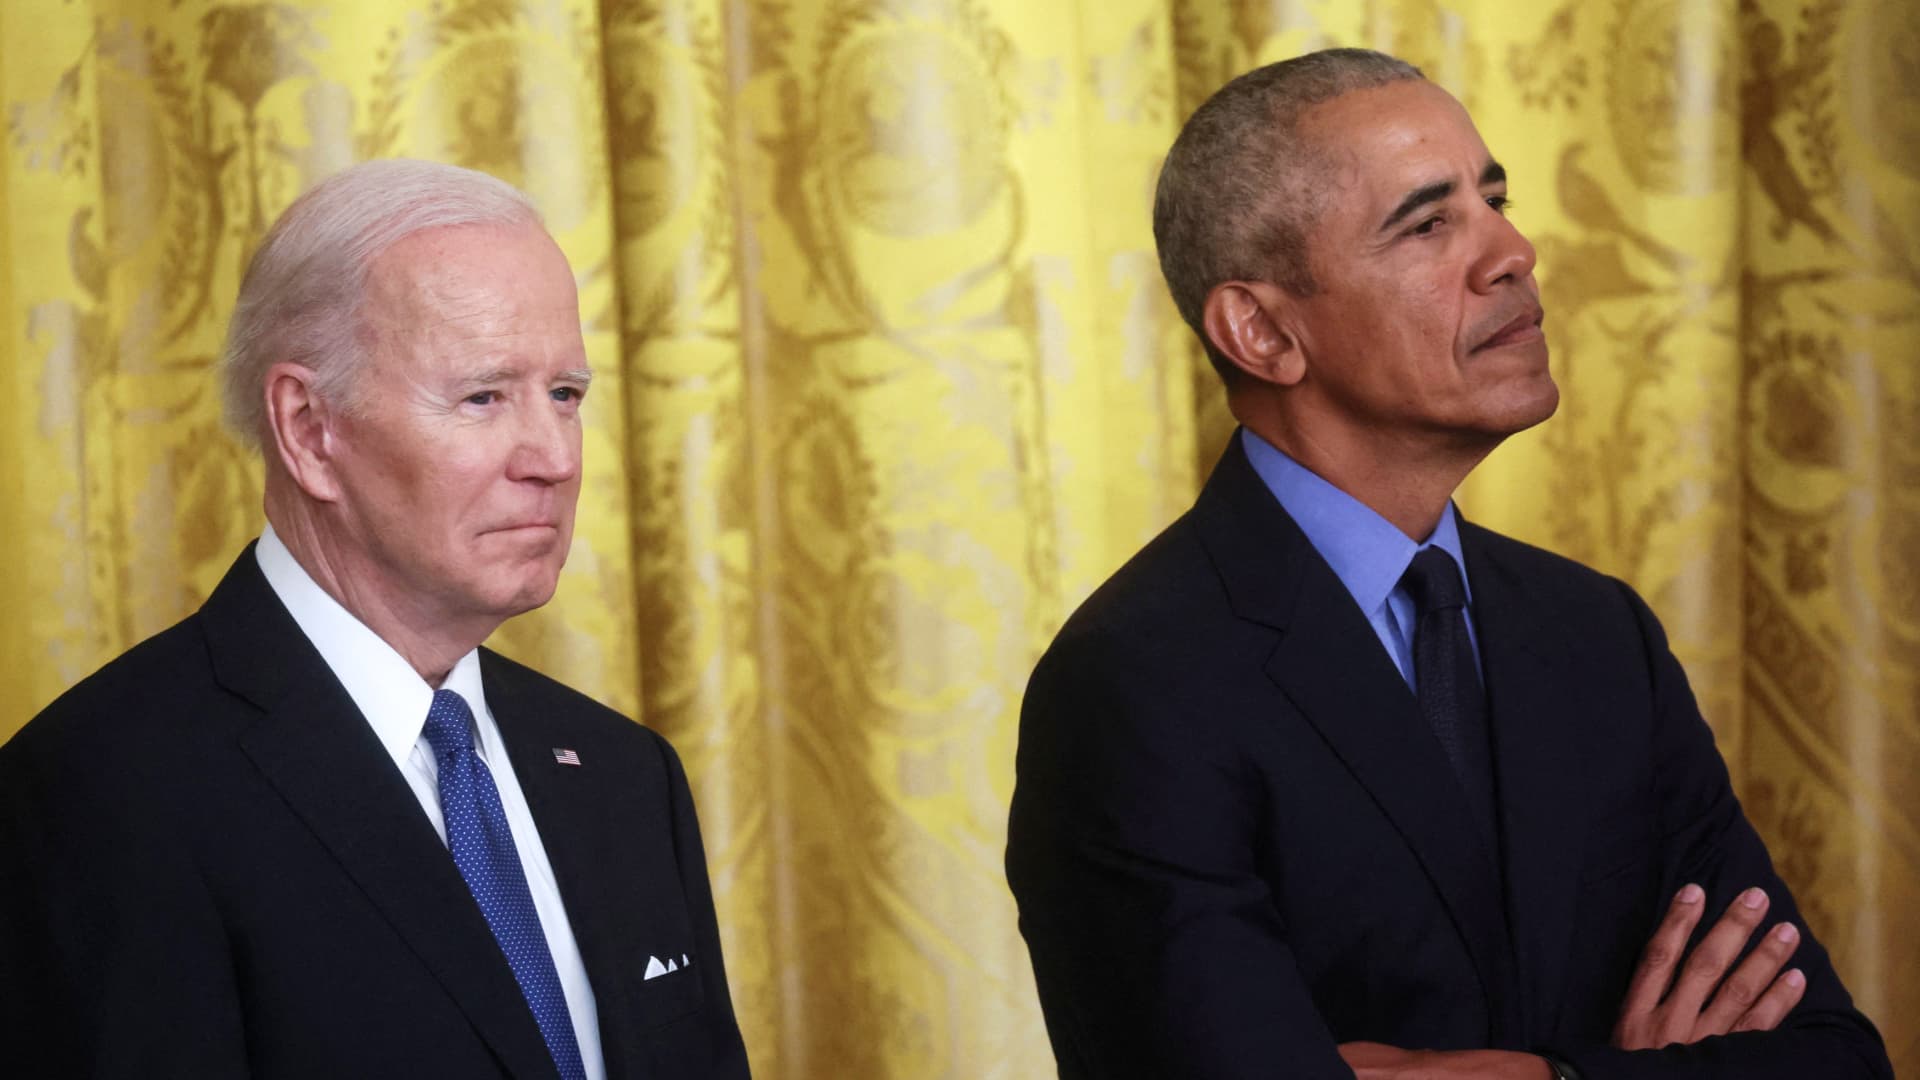 Biden and Obama to campaign together for the first time during midterm-election push thumbnail